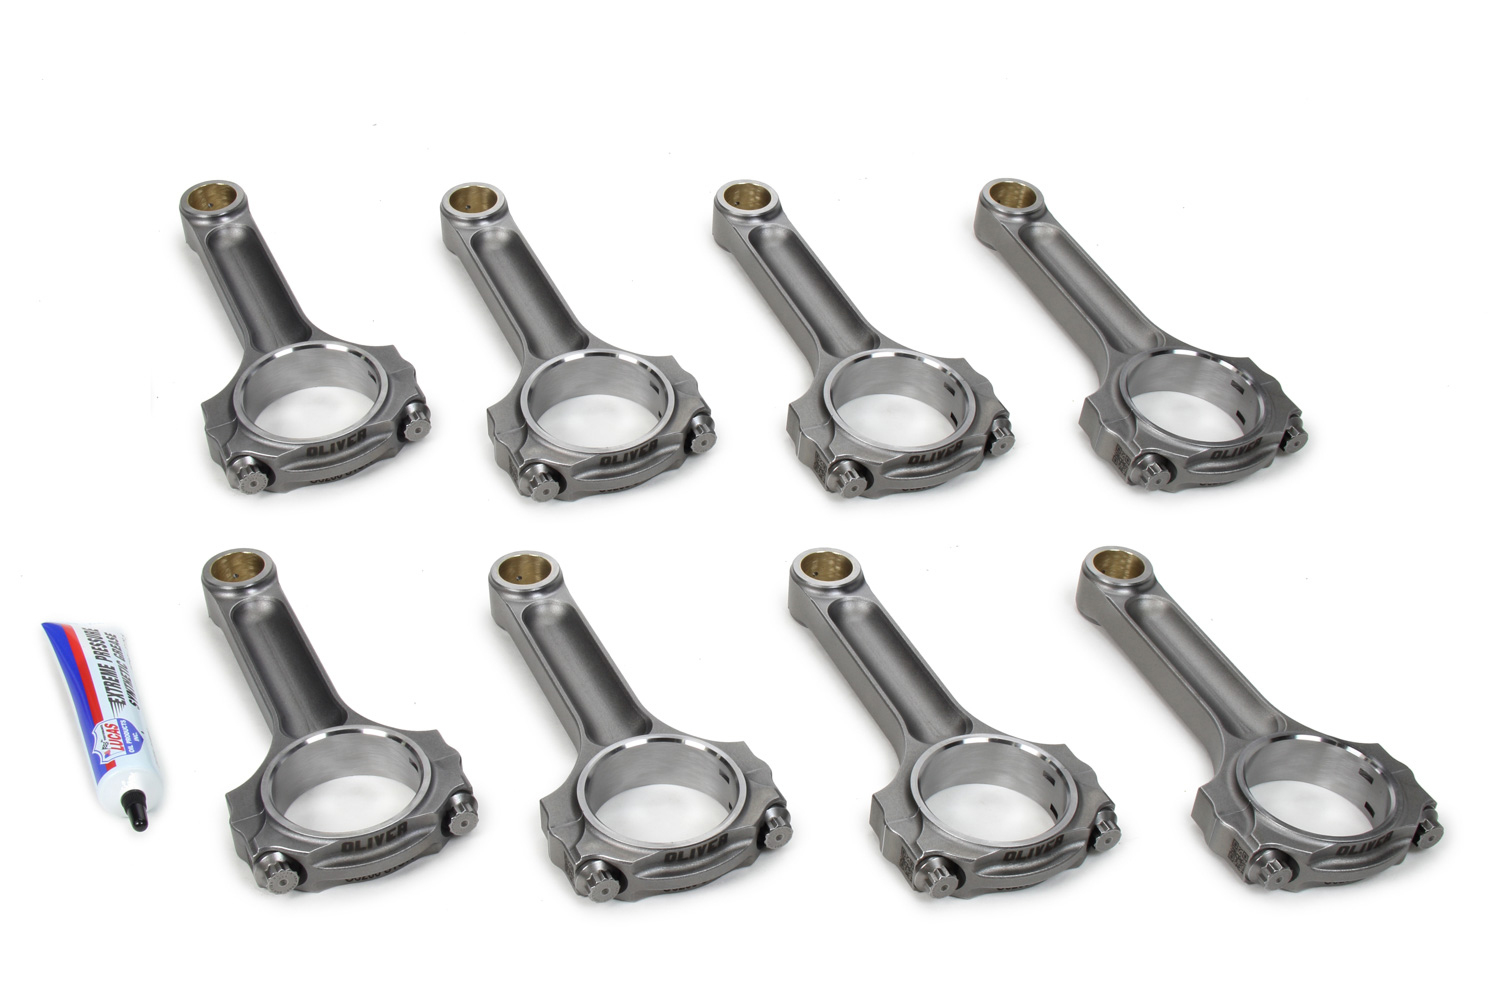 Oliver Rods C6000SMLT8 Connecting Rod, Standard Light, I Beam, 6.000 in Long, Bushed, 7/16 in Cap Screws, Forged Steel, Small Block Chevy, Set of 8